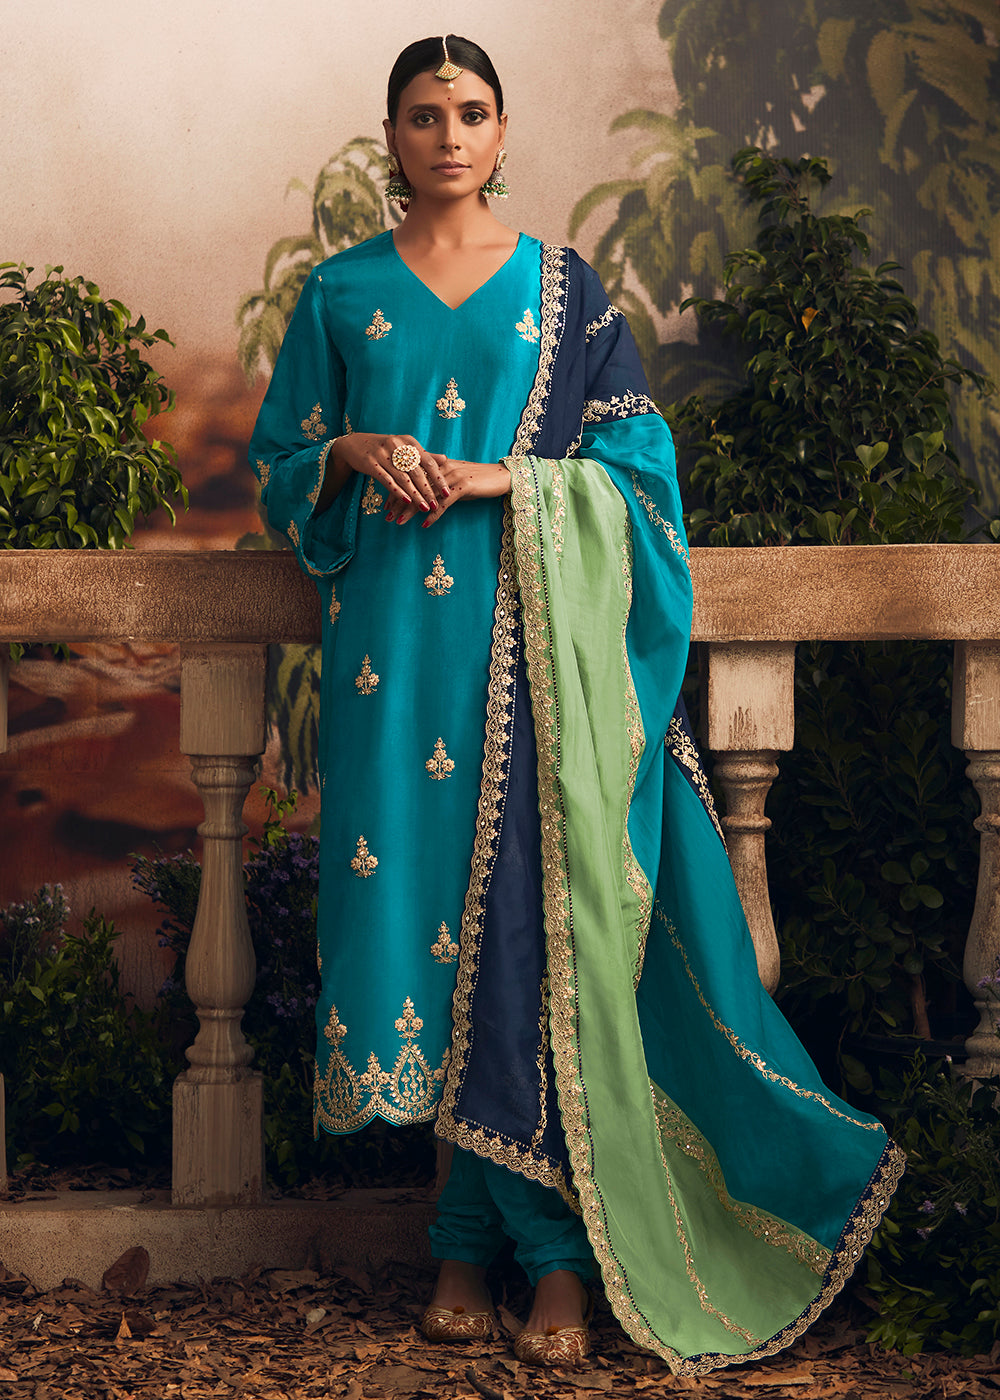 Buy Now Silk Modale Aqua Blue Embroidered Festive Salwar Suit Online in USA, UK, Canada, Germany, Australia & Worldwide at Empress Clothing. 